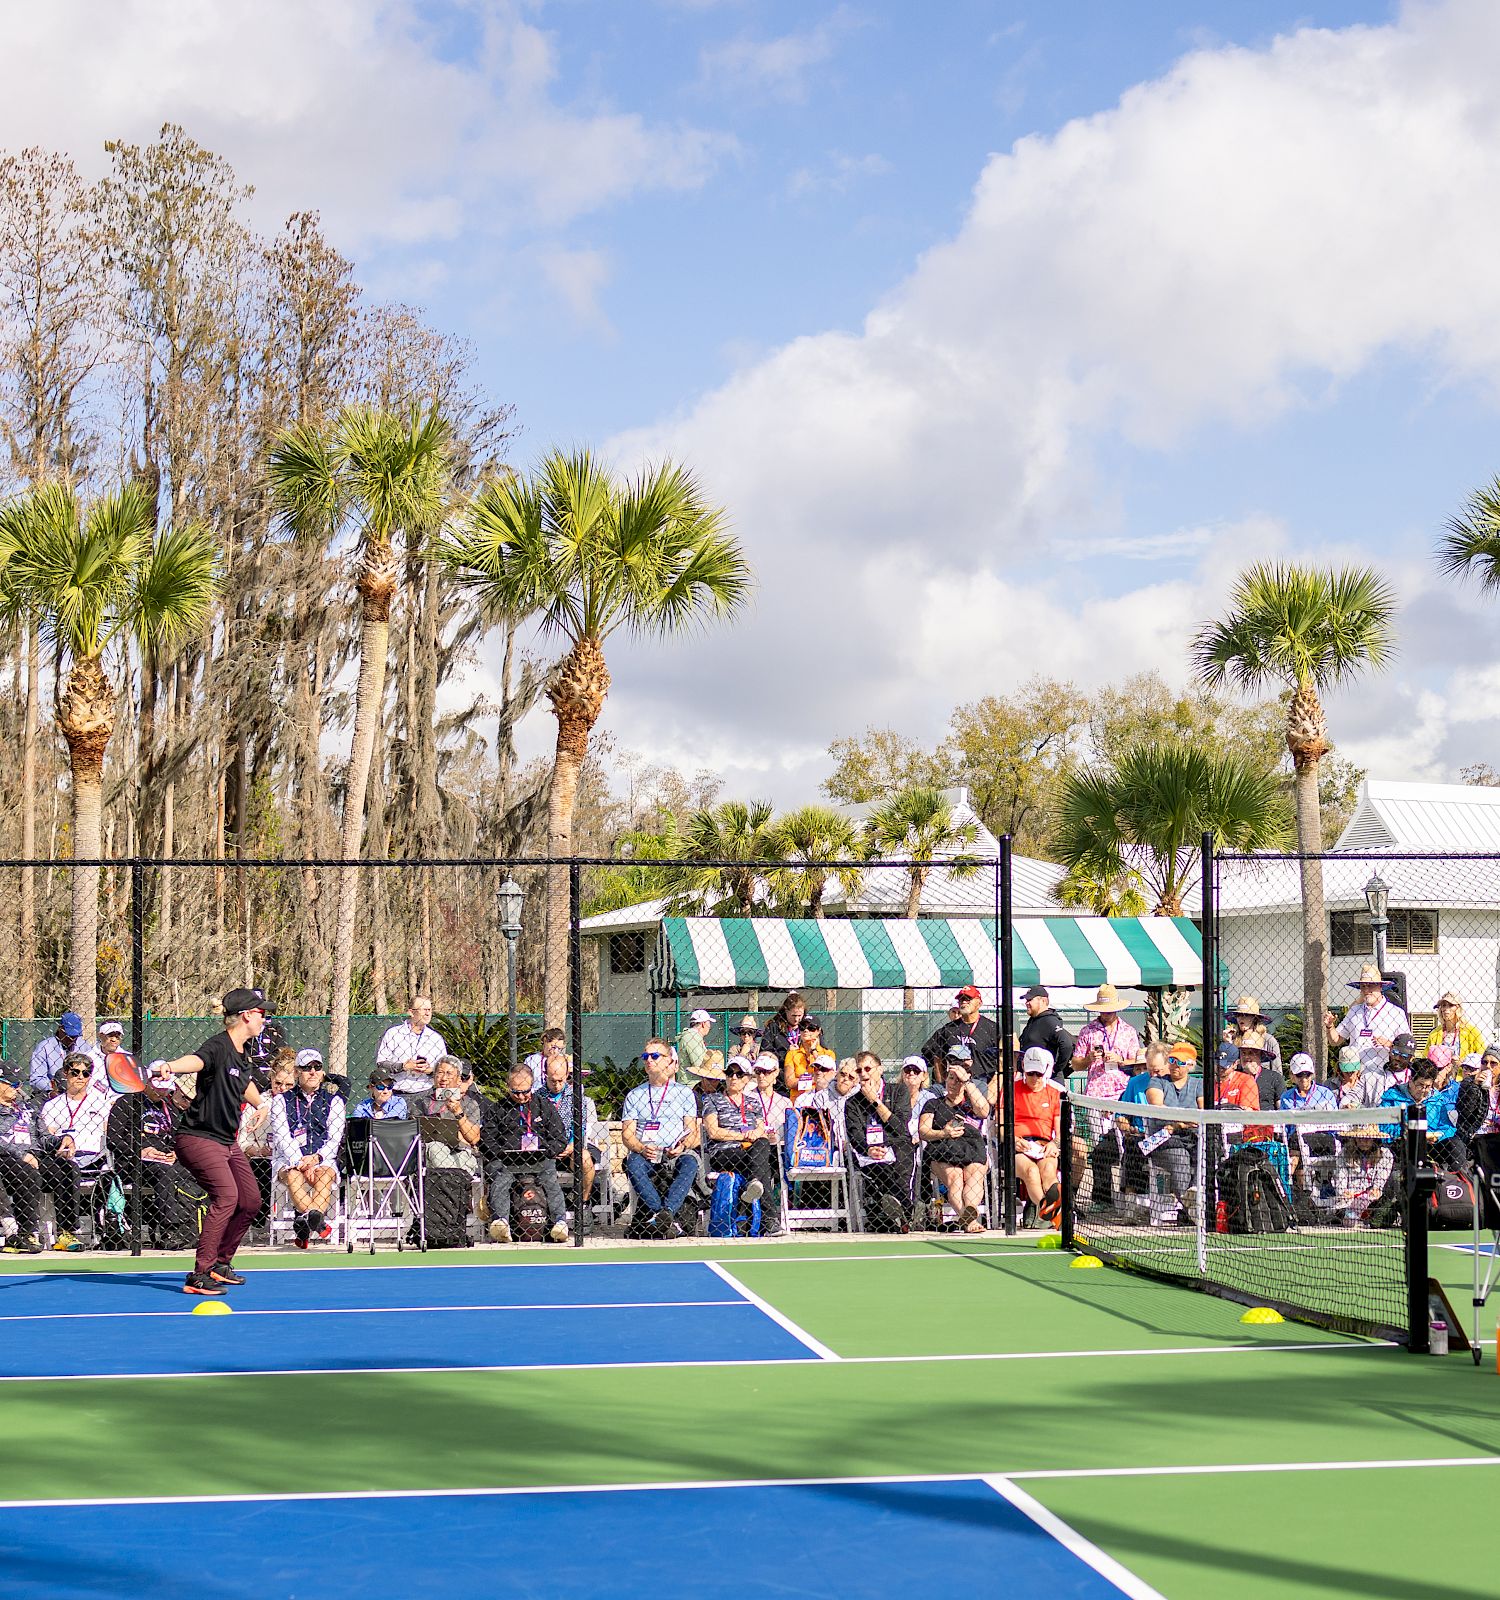 People are playing pickleball on an outdoor court surrounded by spectators, palm trees, and a building with a striped awning in the background.